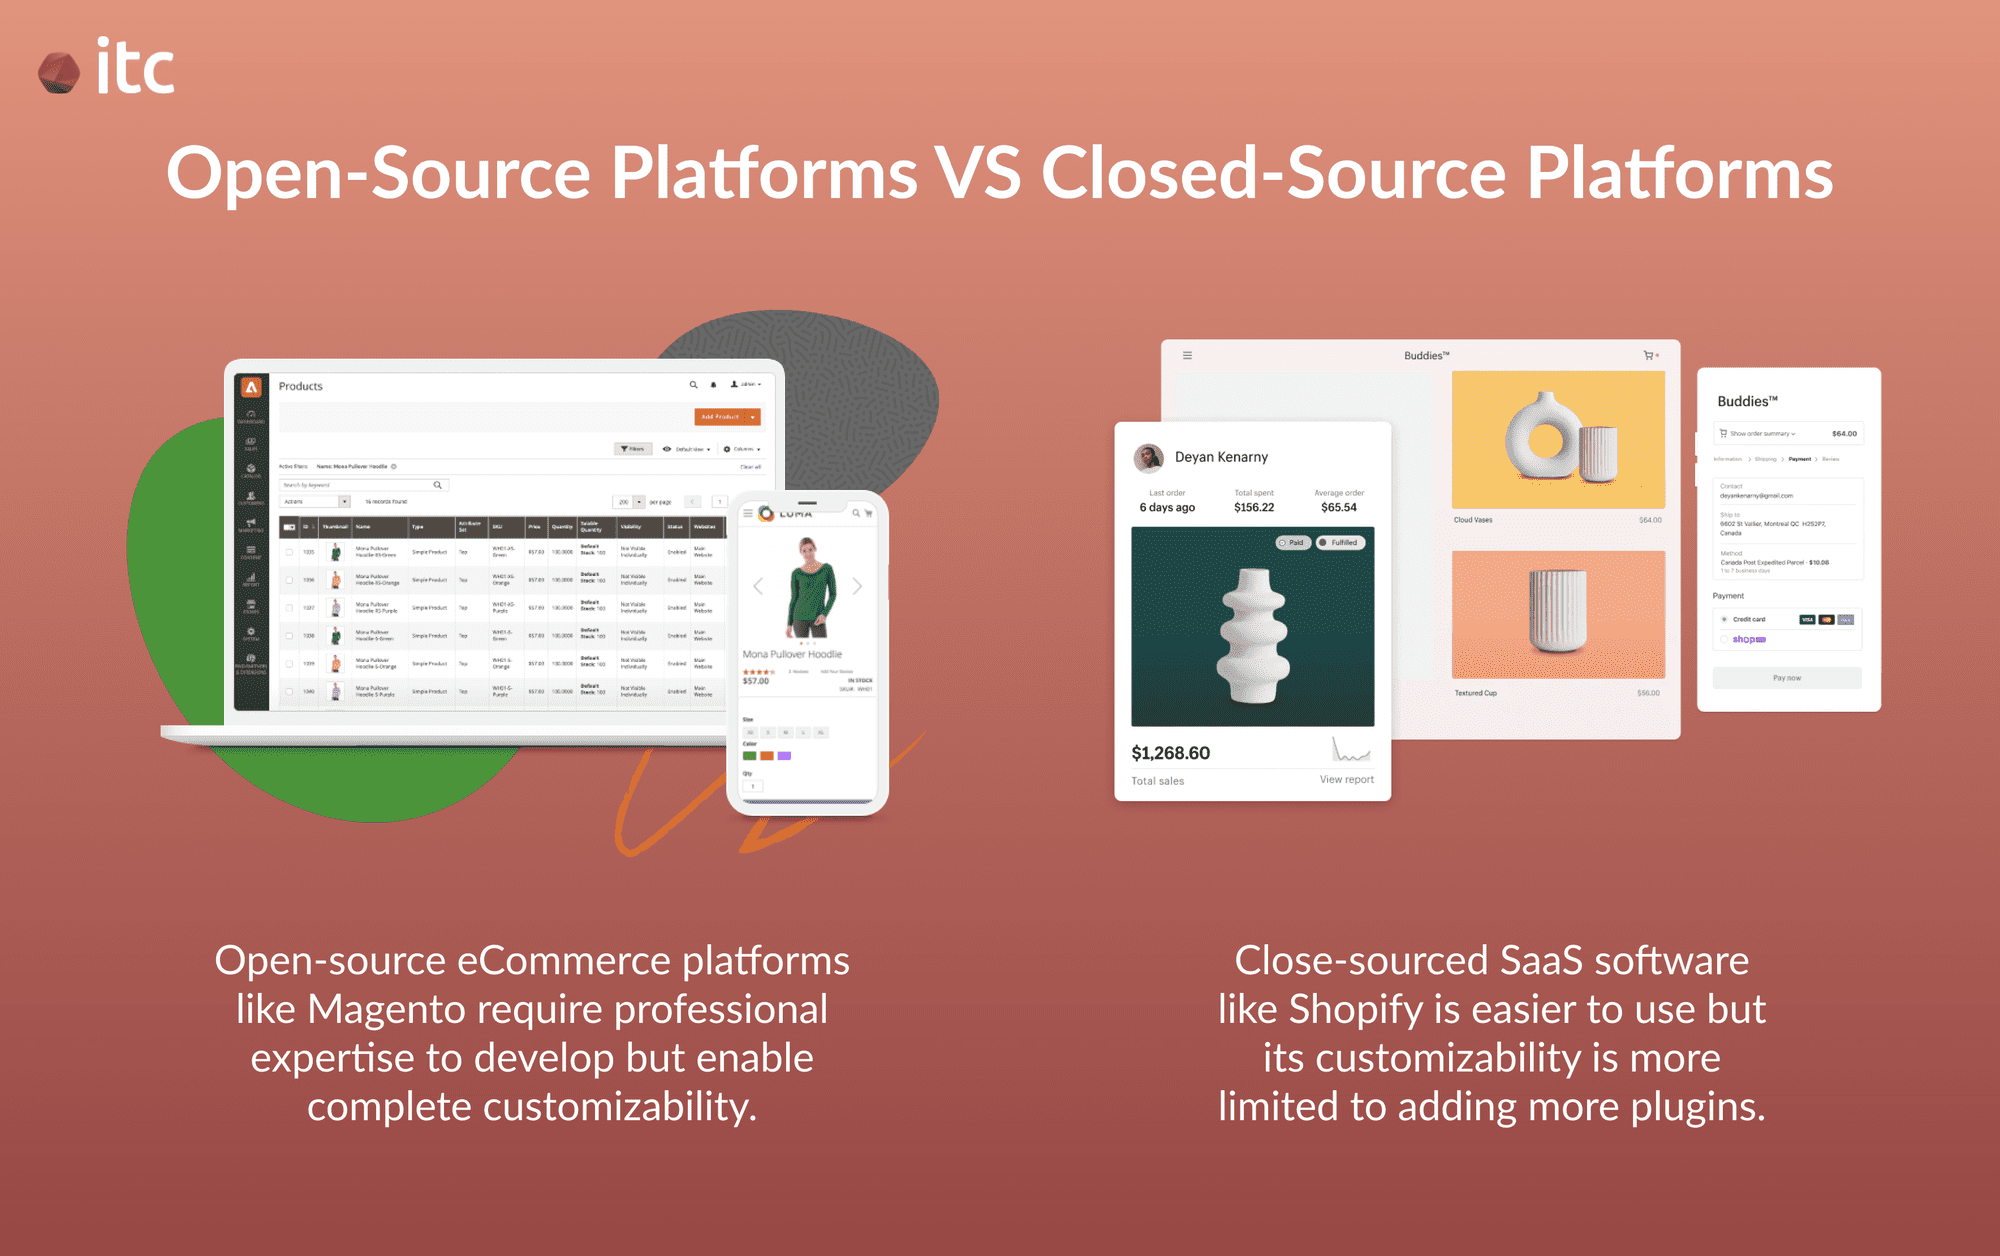 Open-source platforms provide more customizability than closed-source platforms (SaaS software)